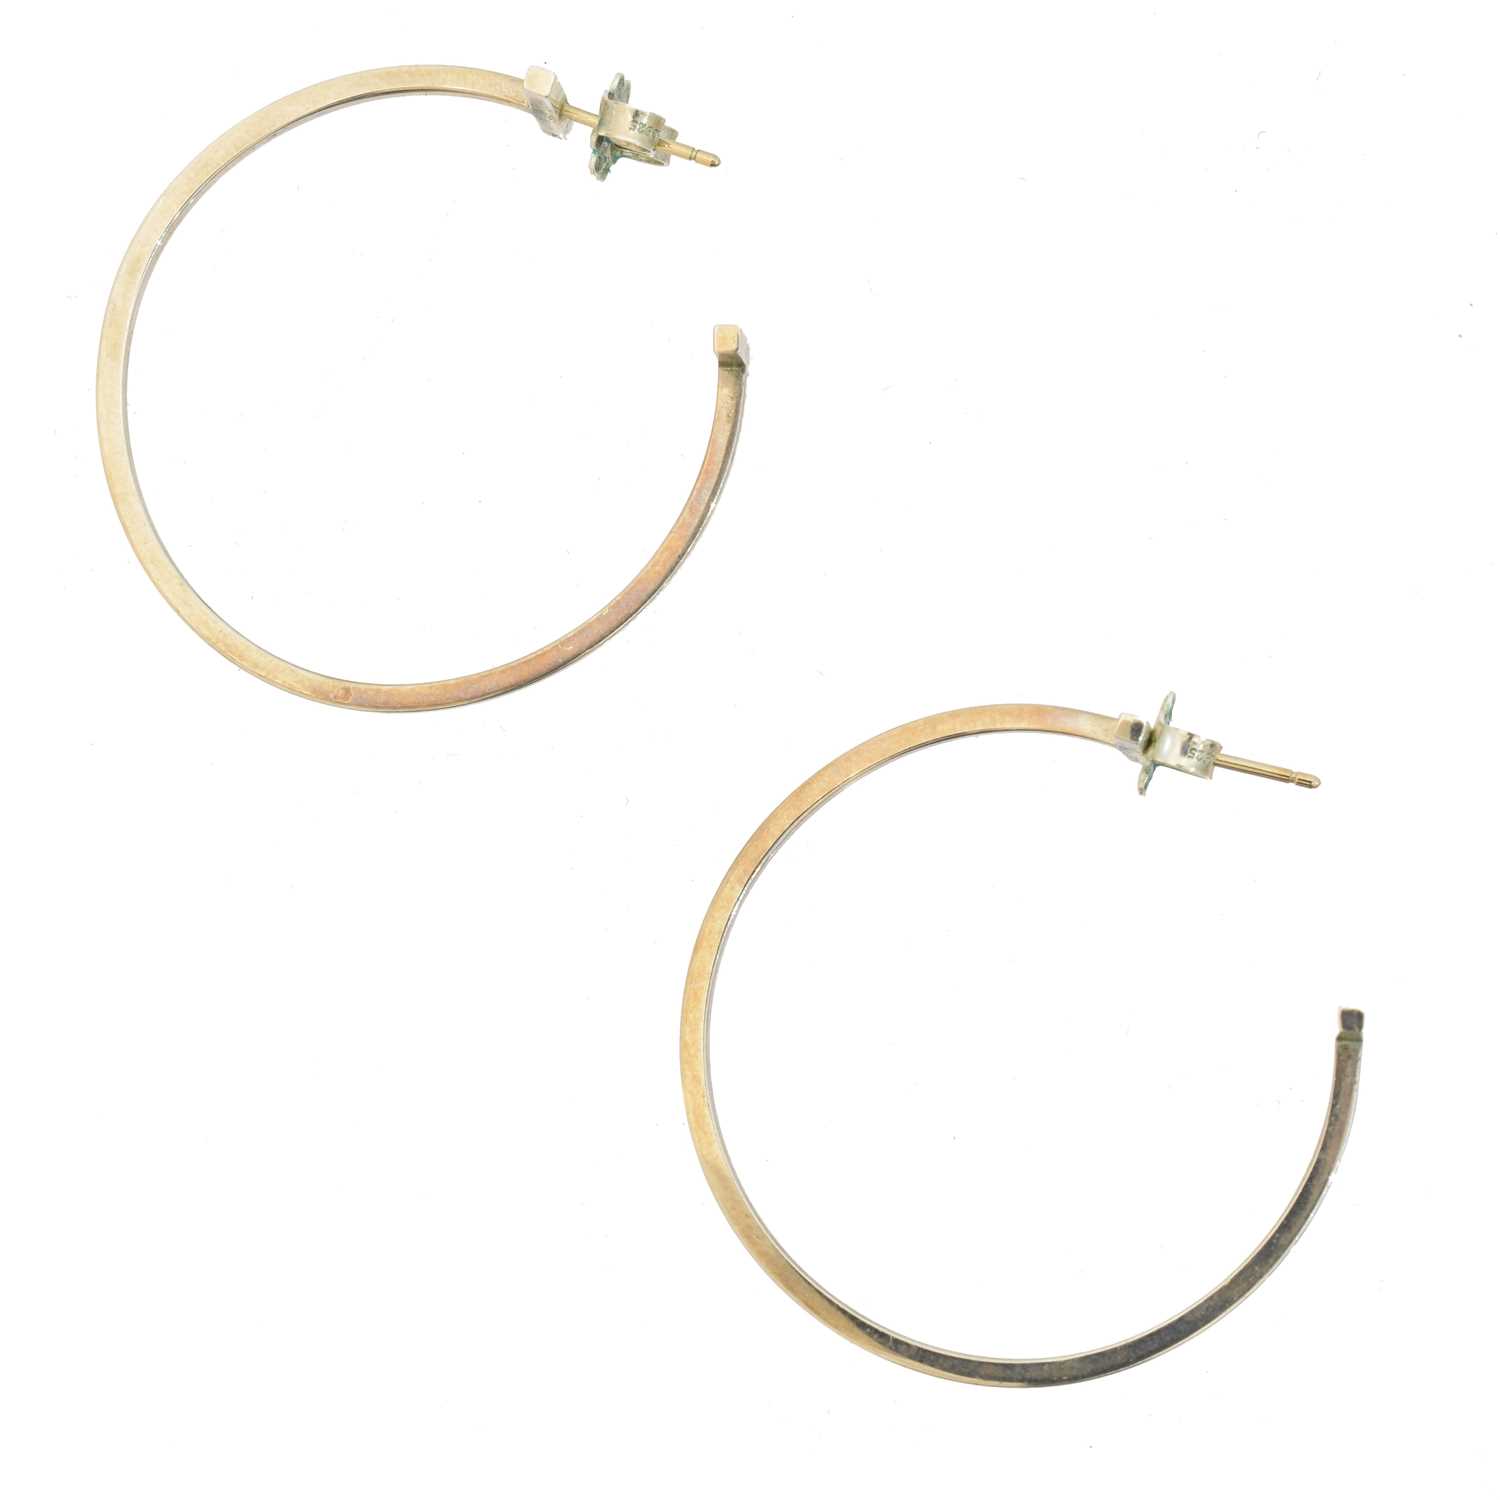 Lot 19 - A pair of Tiffany & Co. 'T Collection' hoop earrings